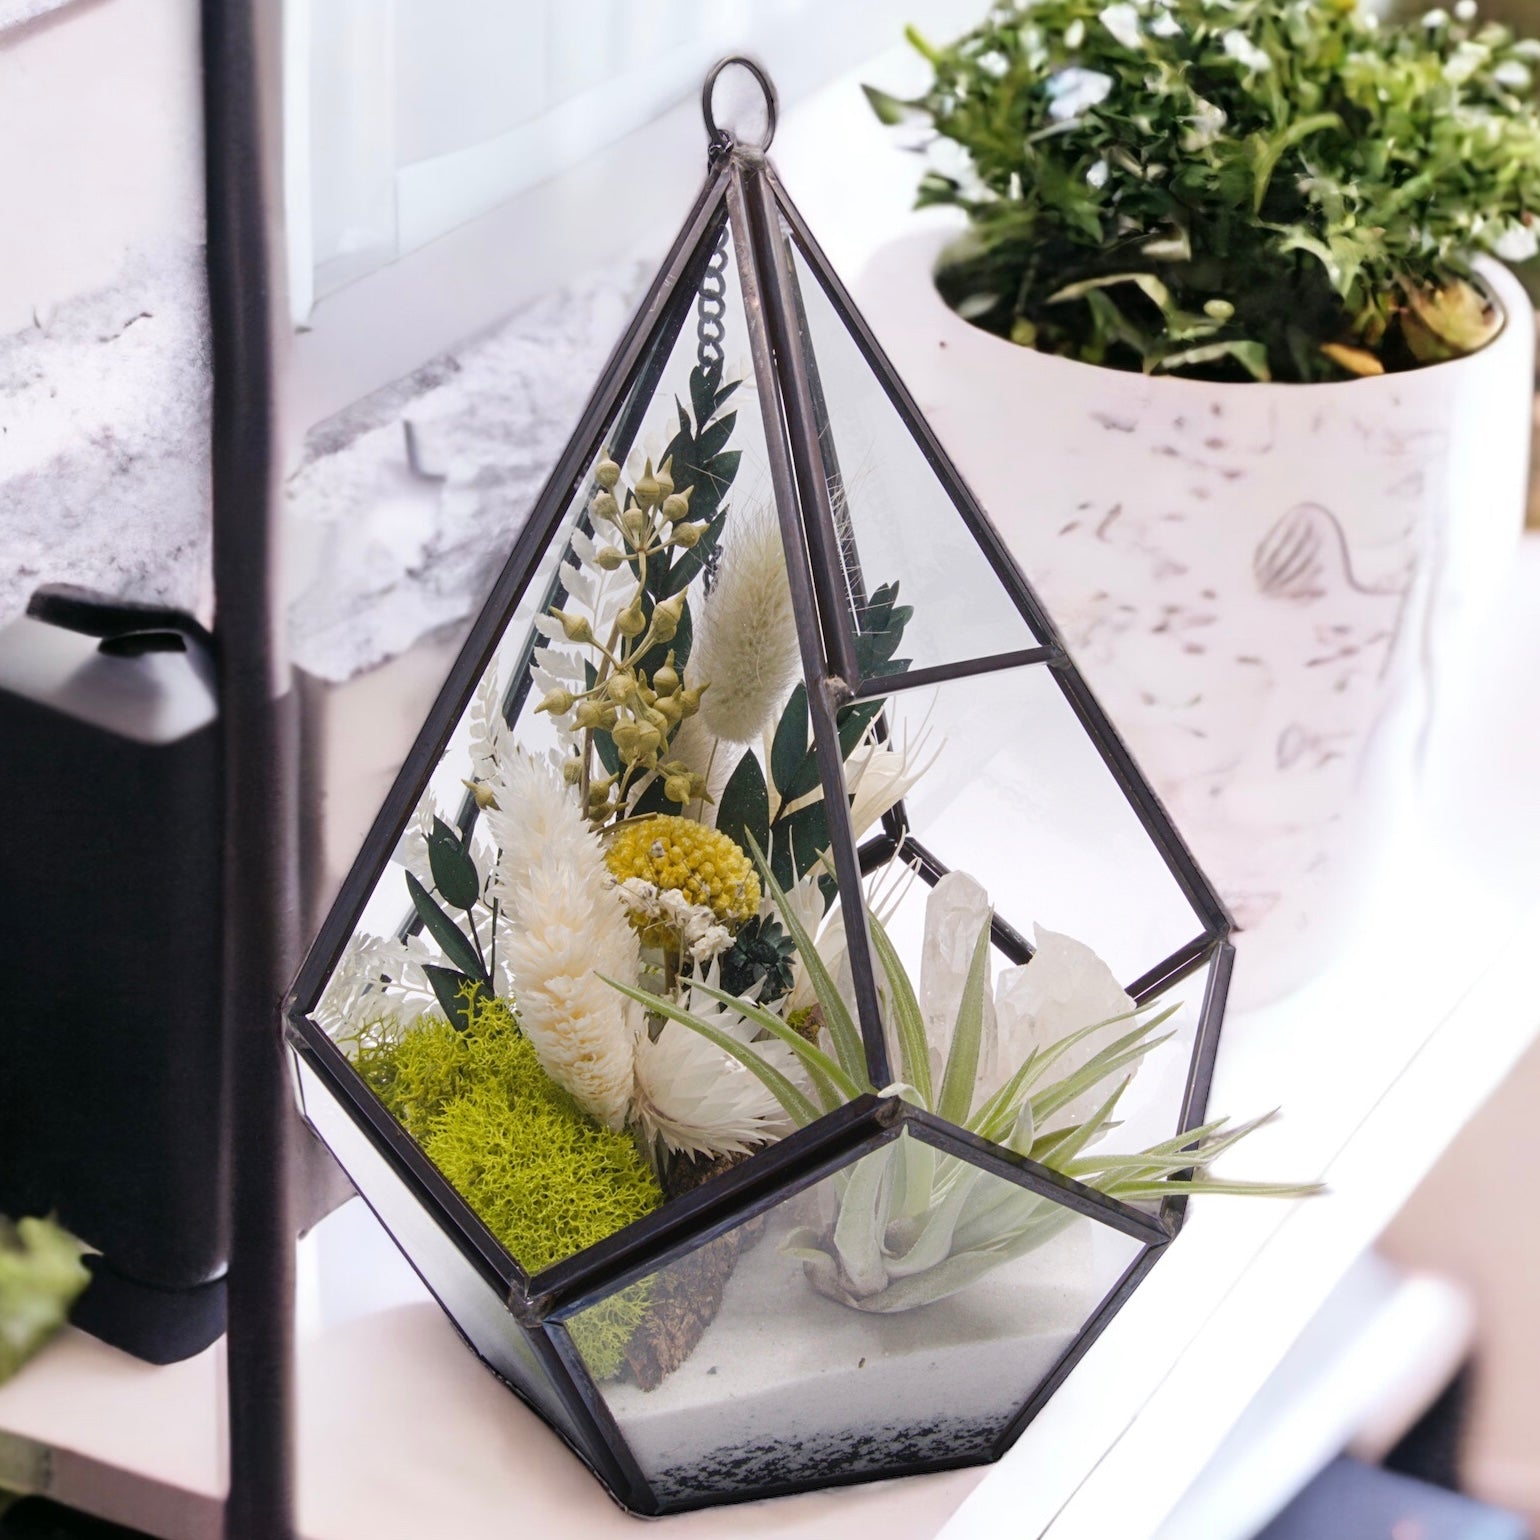 Glass geometric black terrarium with dried flowers, sand, moss, wood and an airplant